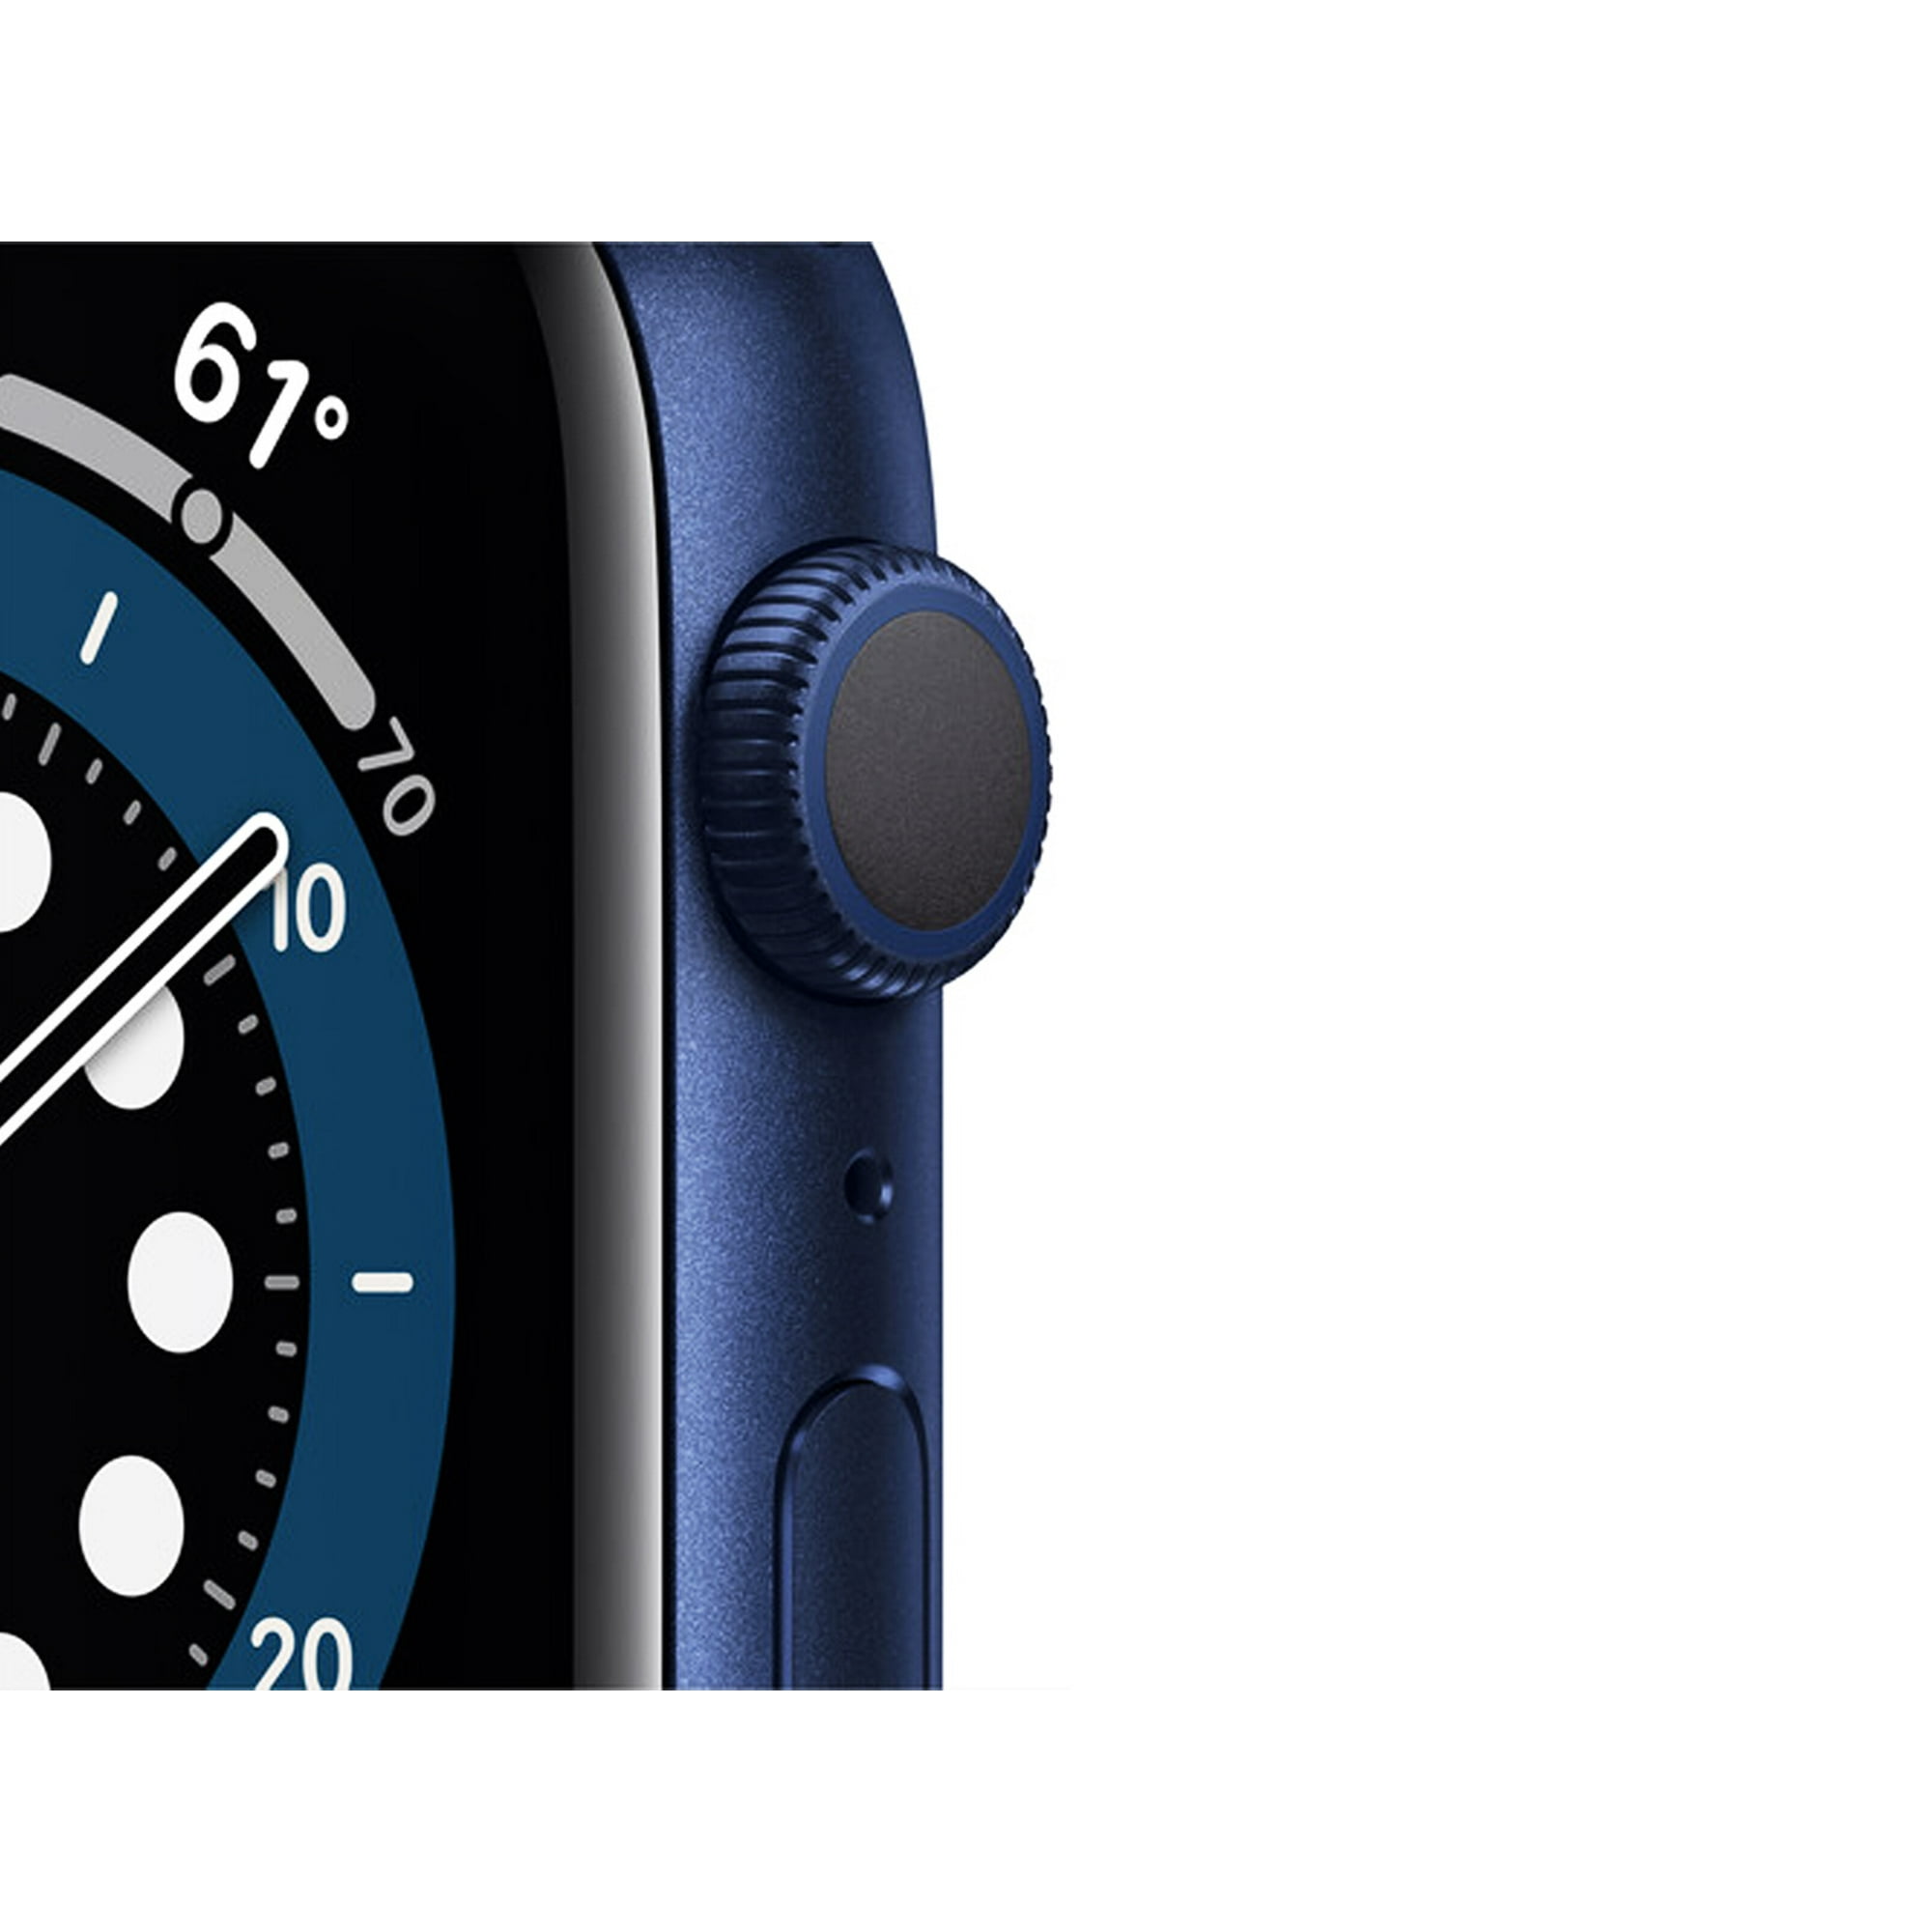 AppleWatch Series 6 (GPS, 44mm) - Blue Aluminum Case with Deep